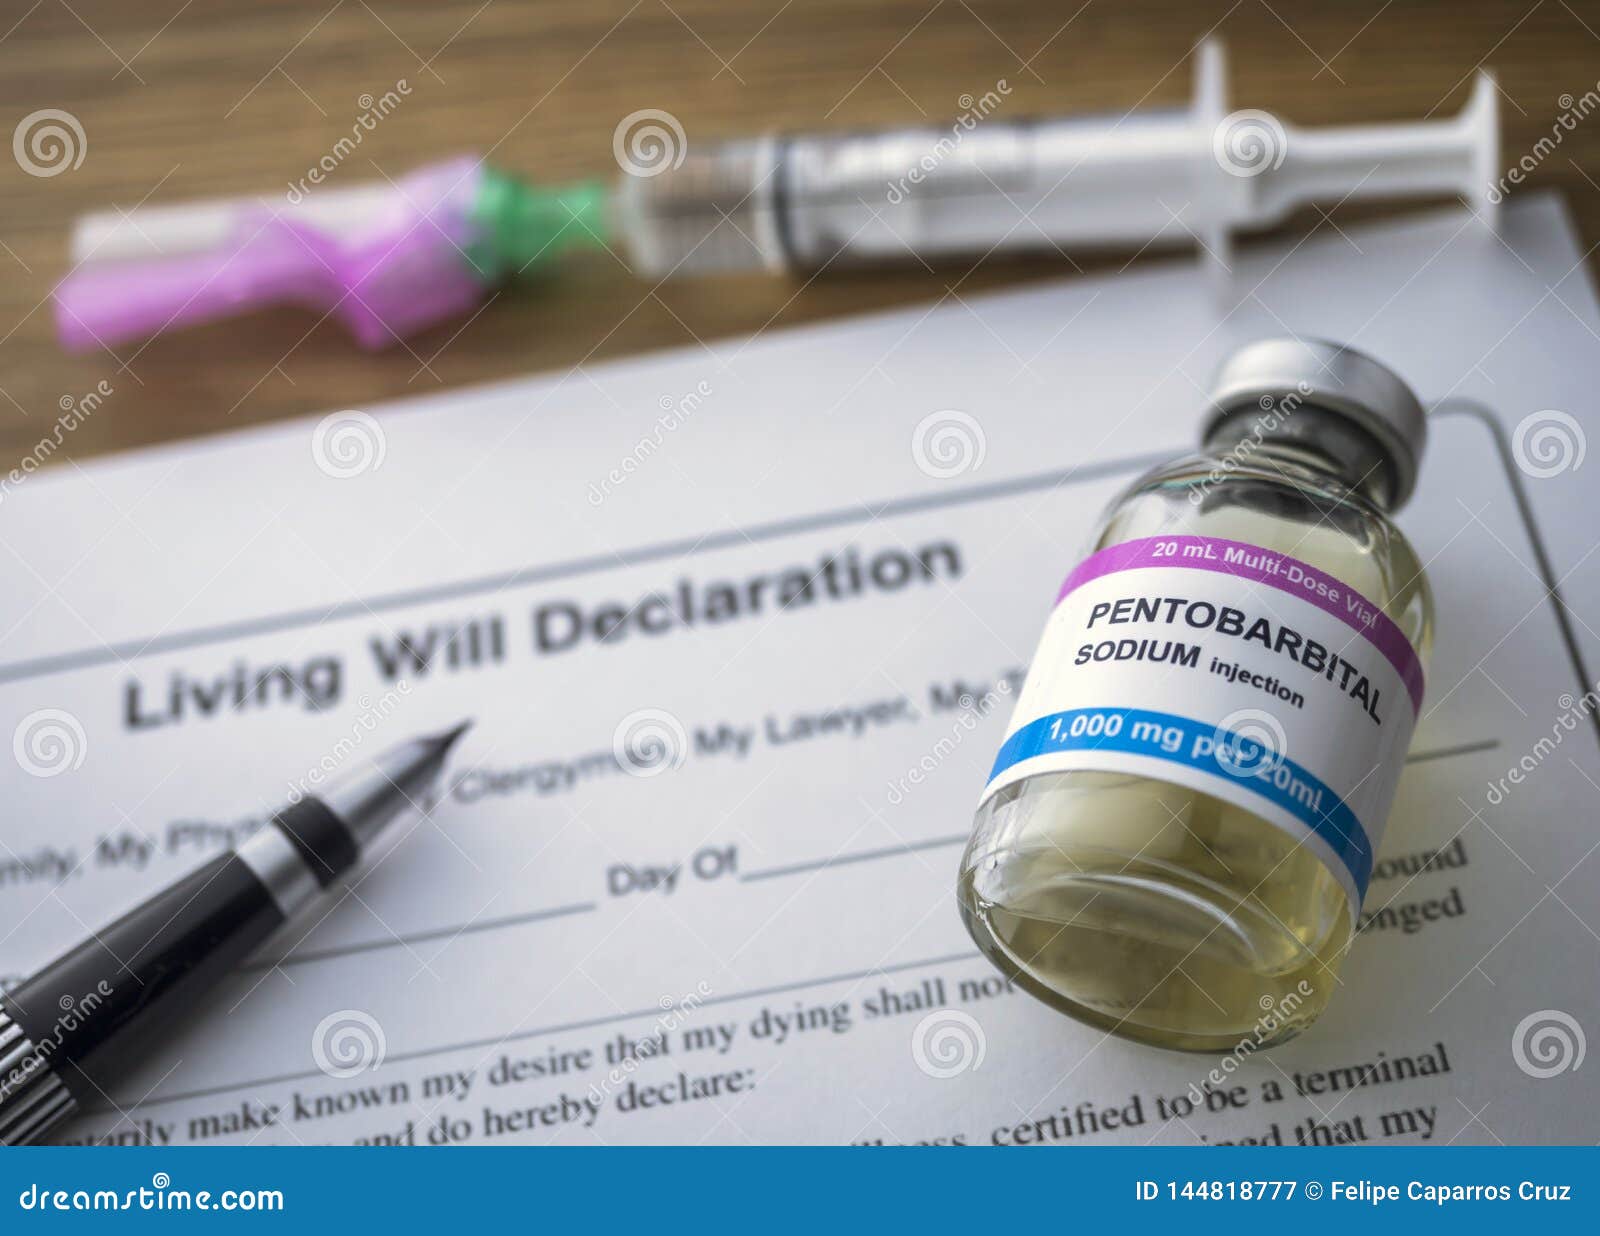 living will declaration form next to a vial of pentobarbital sodium to proceed to euthanasia